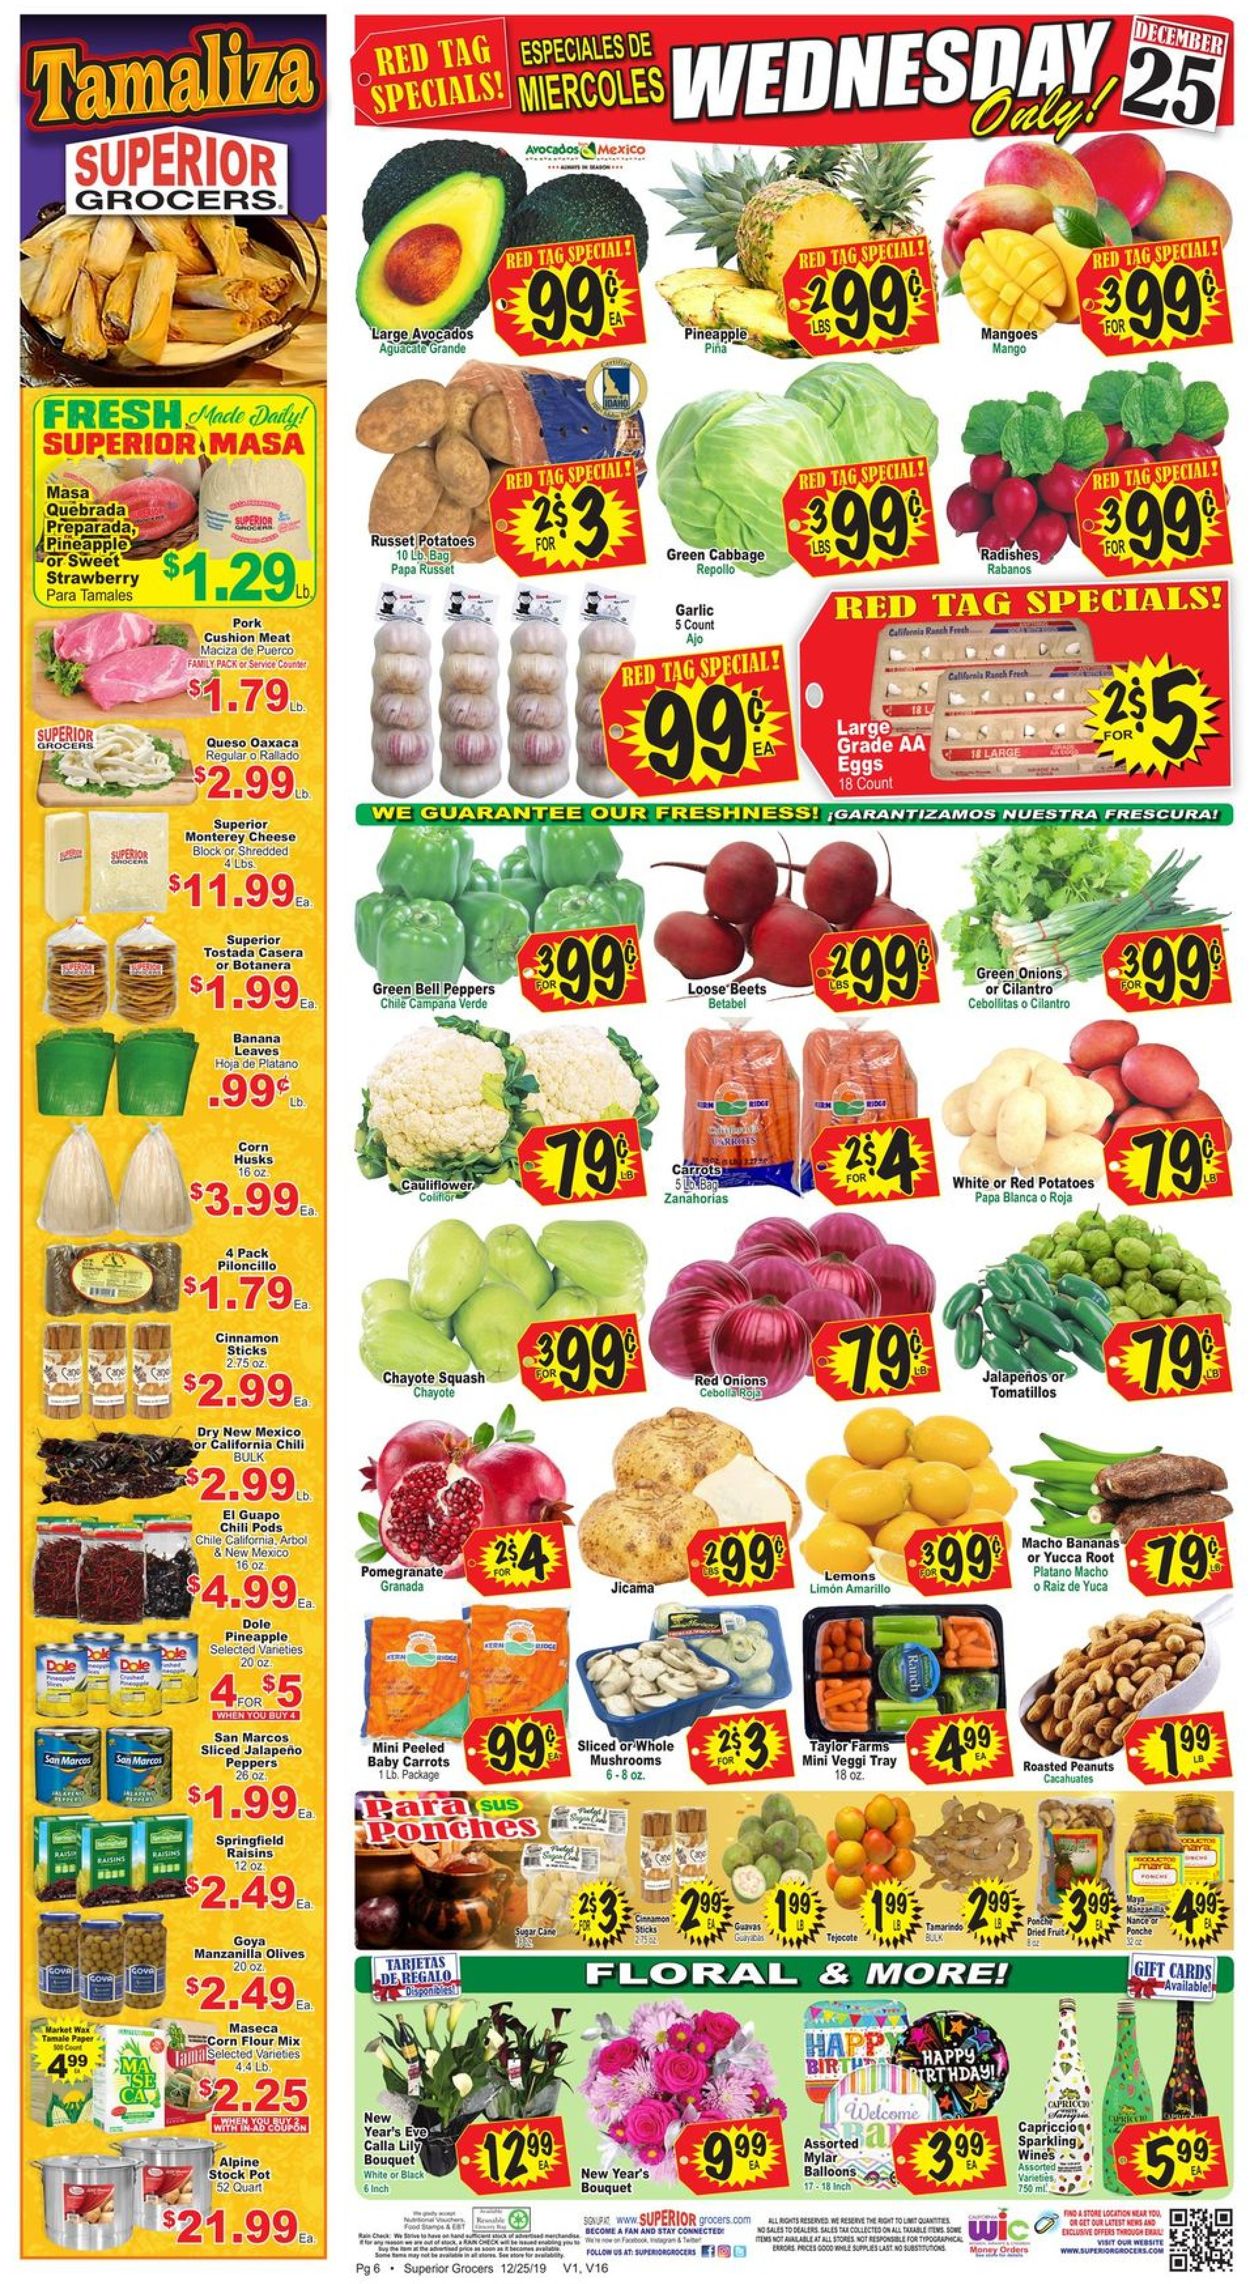 Superior Grocers - New Year's Ad 2019/2020 Current weekly ad 12/25 - 01 ...